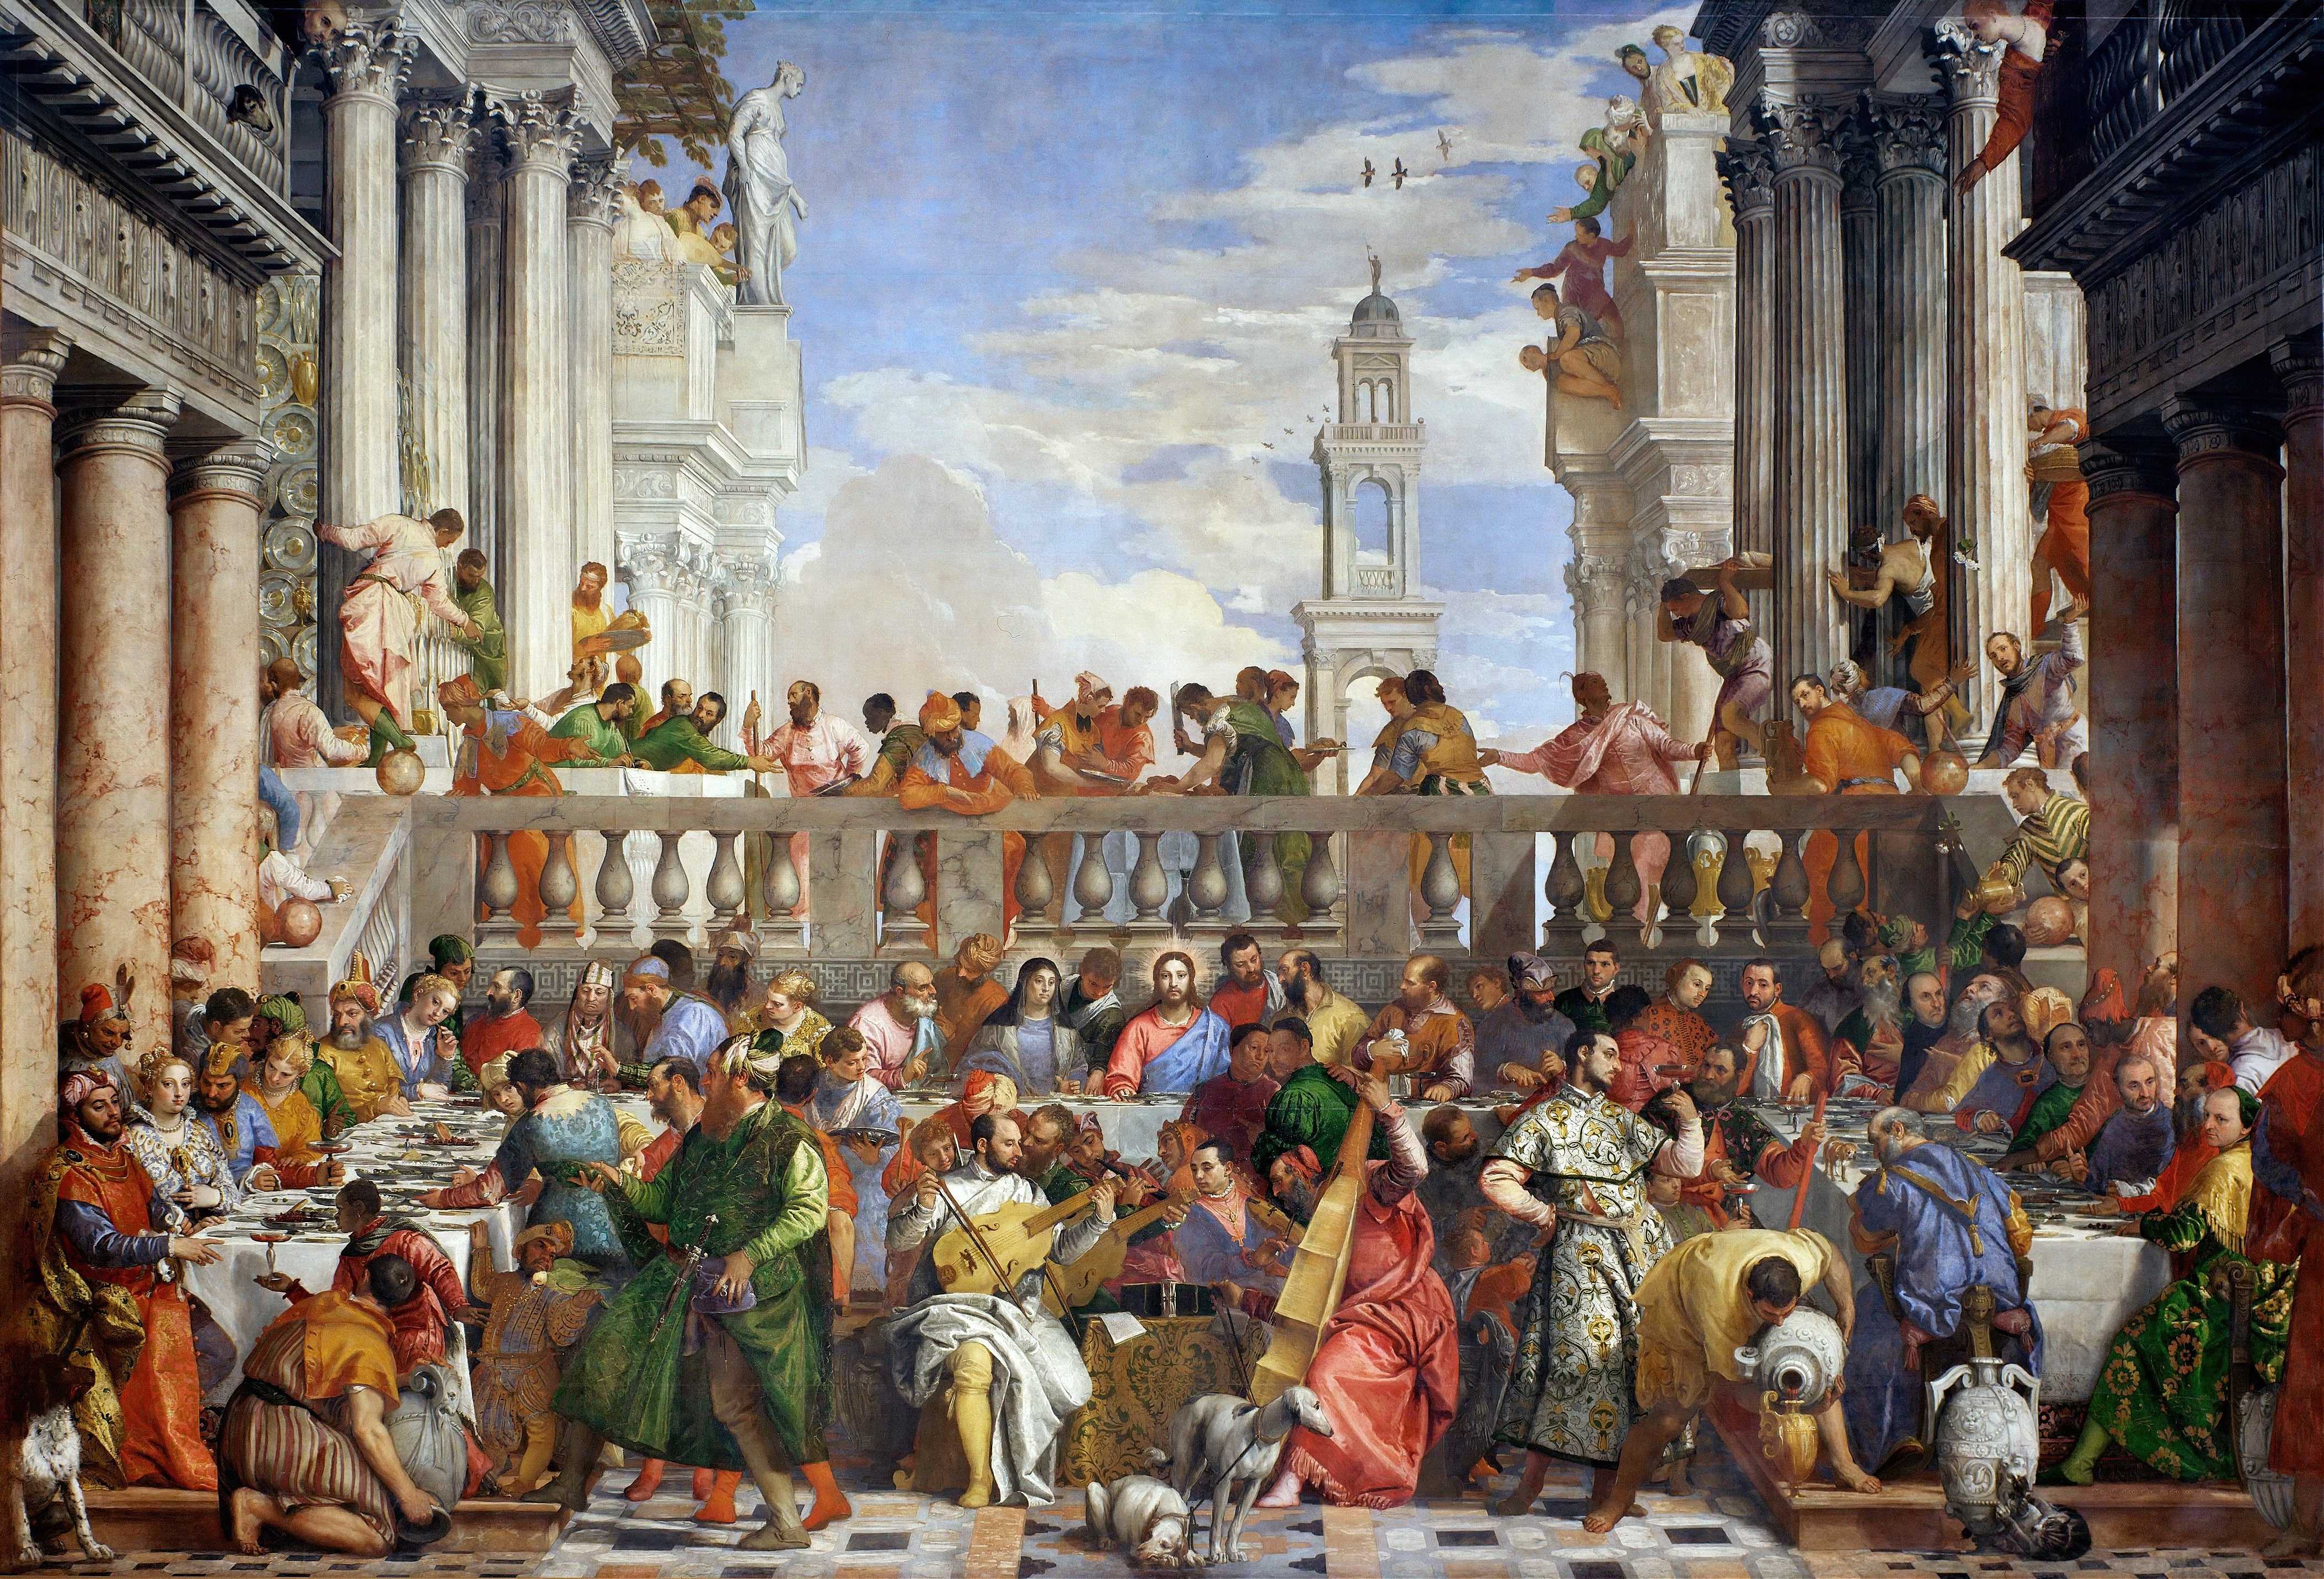 Find out more about Paolo Veronese - The Wedding At Cana